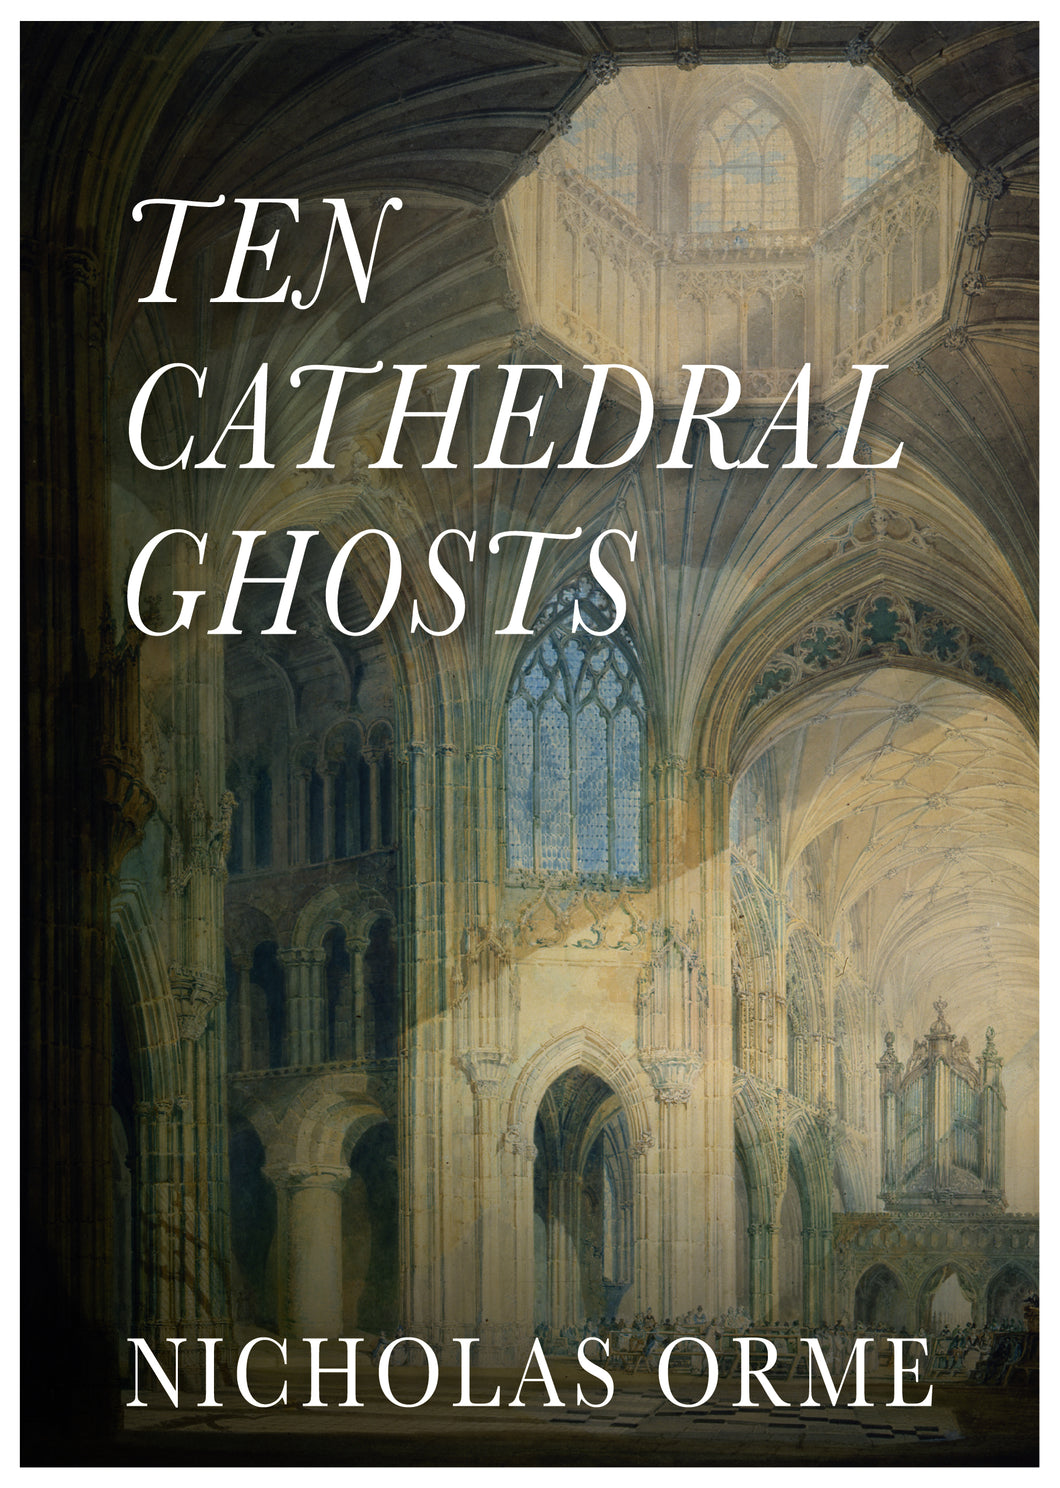 Ten Cathedral Ghosts - Nicholas Orme